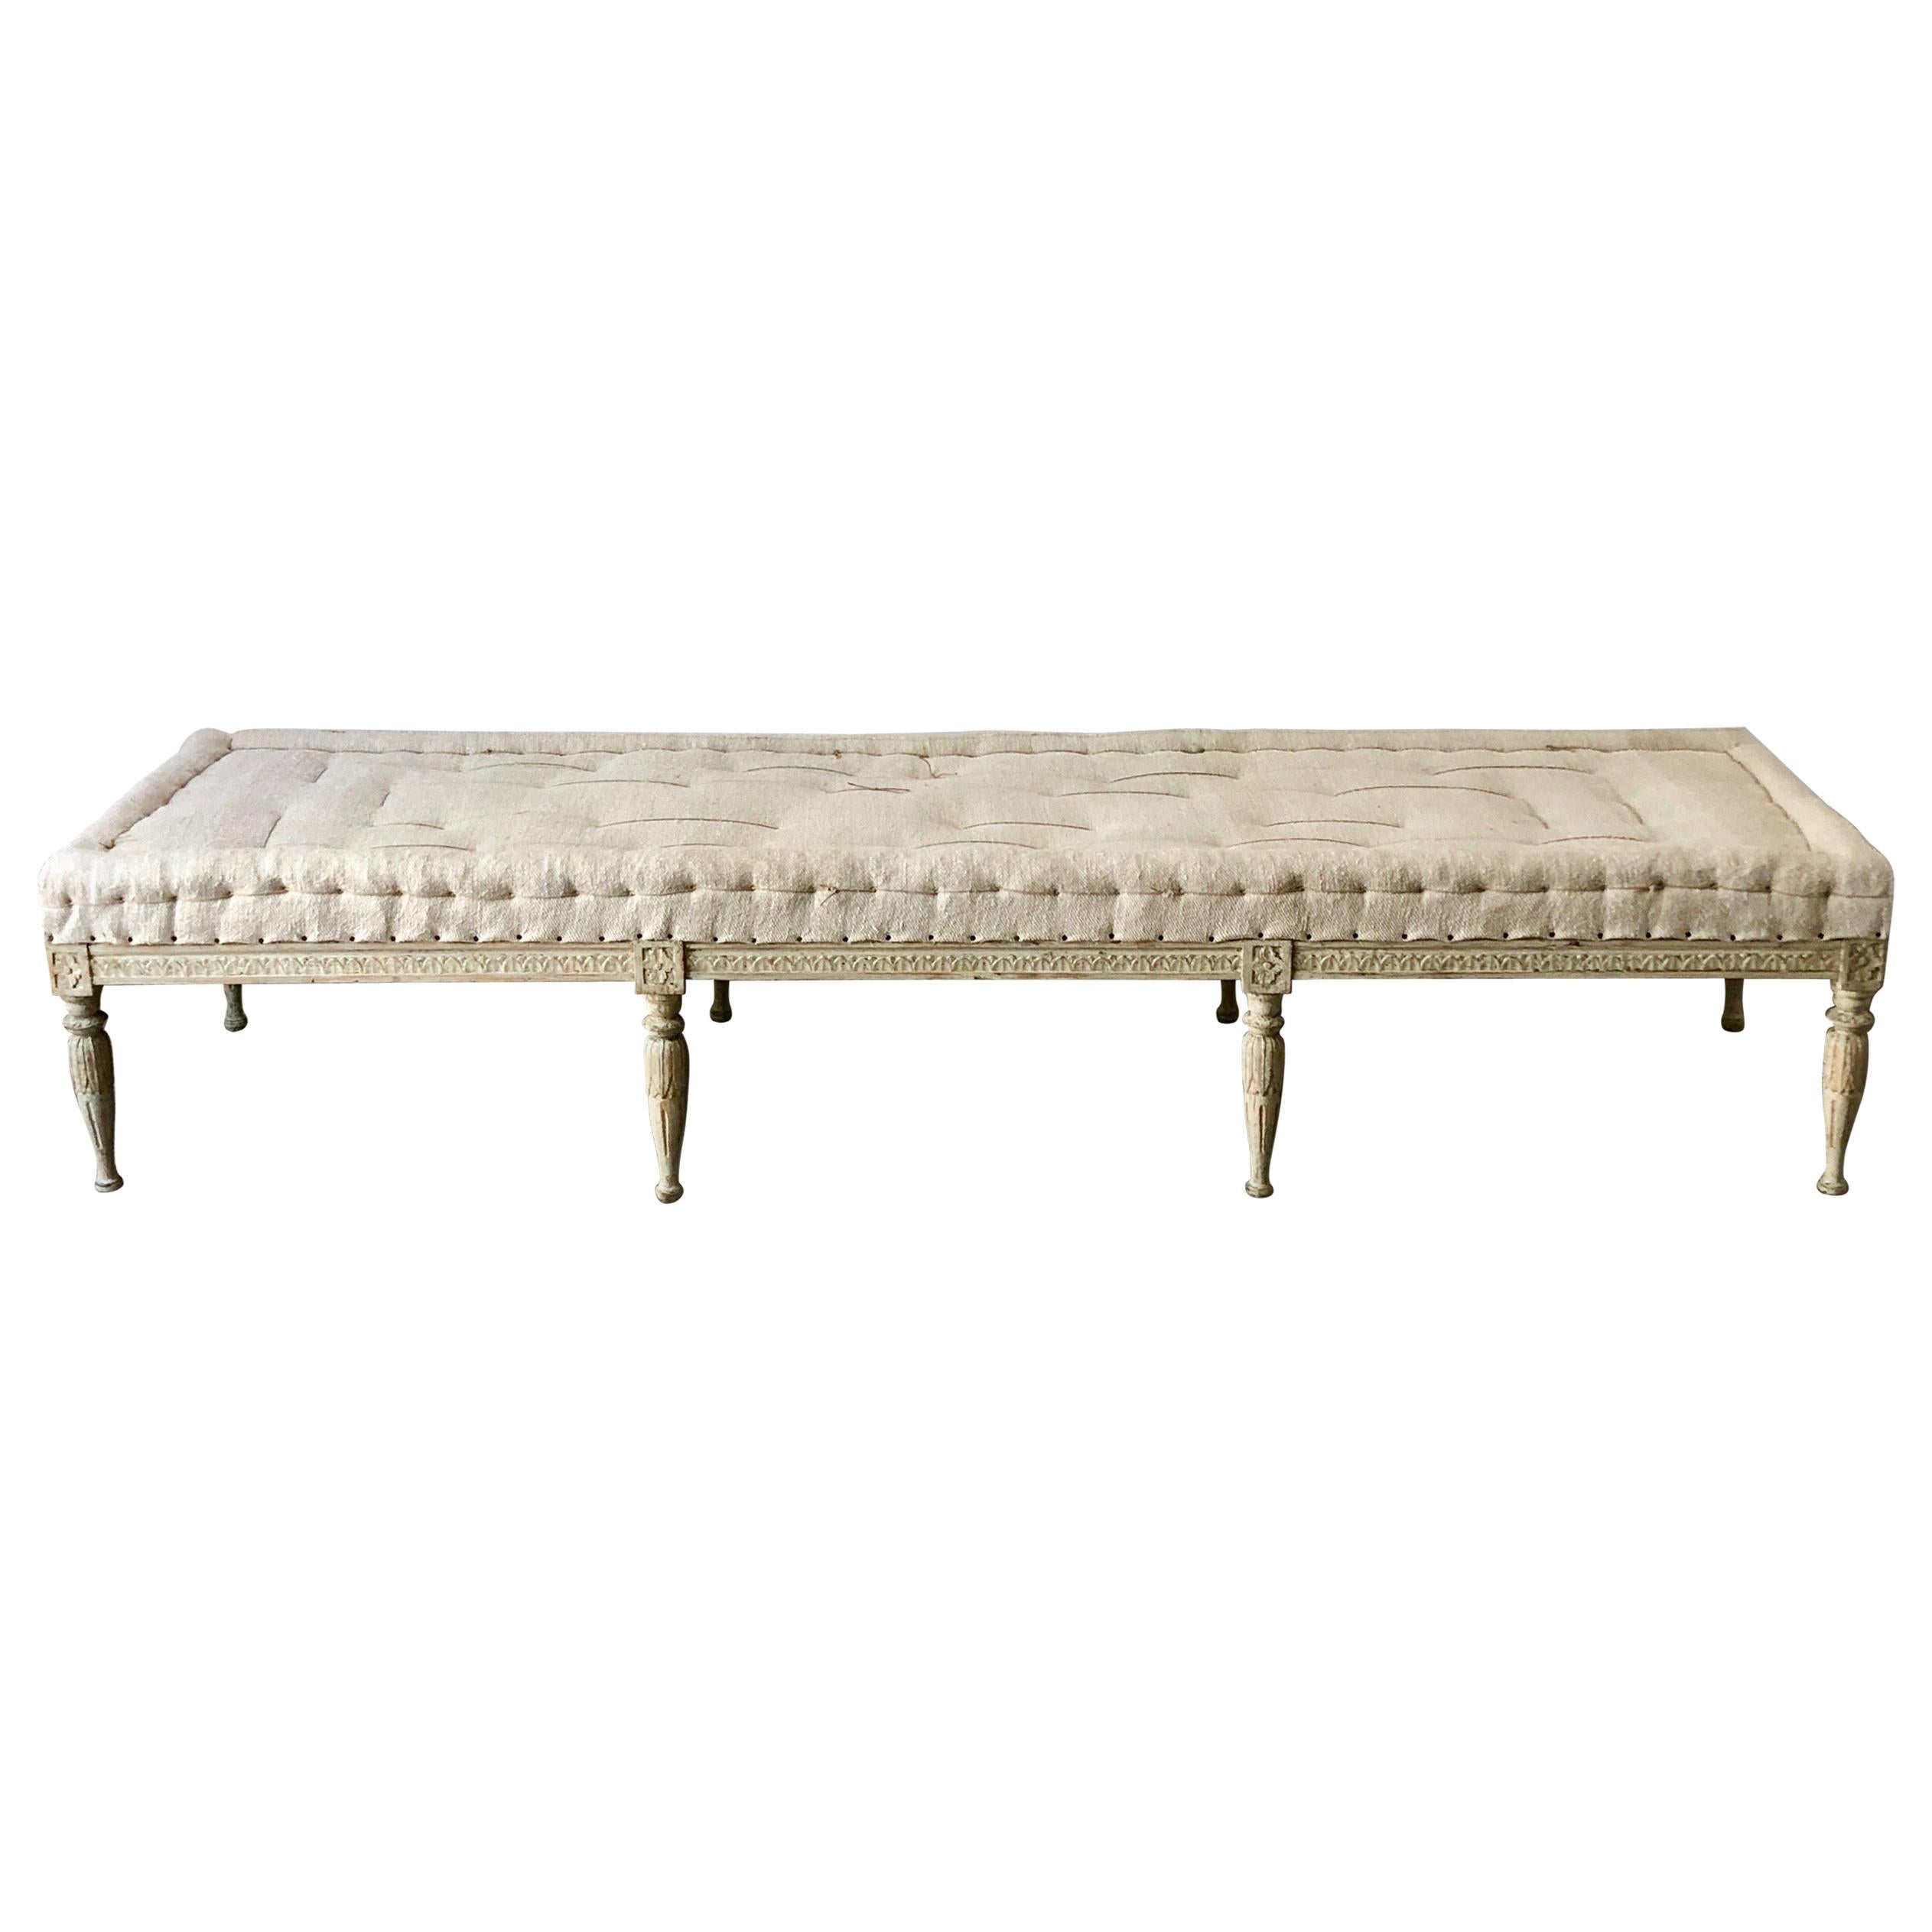 Swedish Gustavian Period Bench with Antique Linen